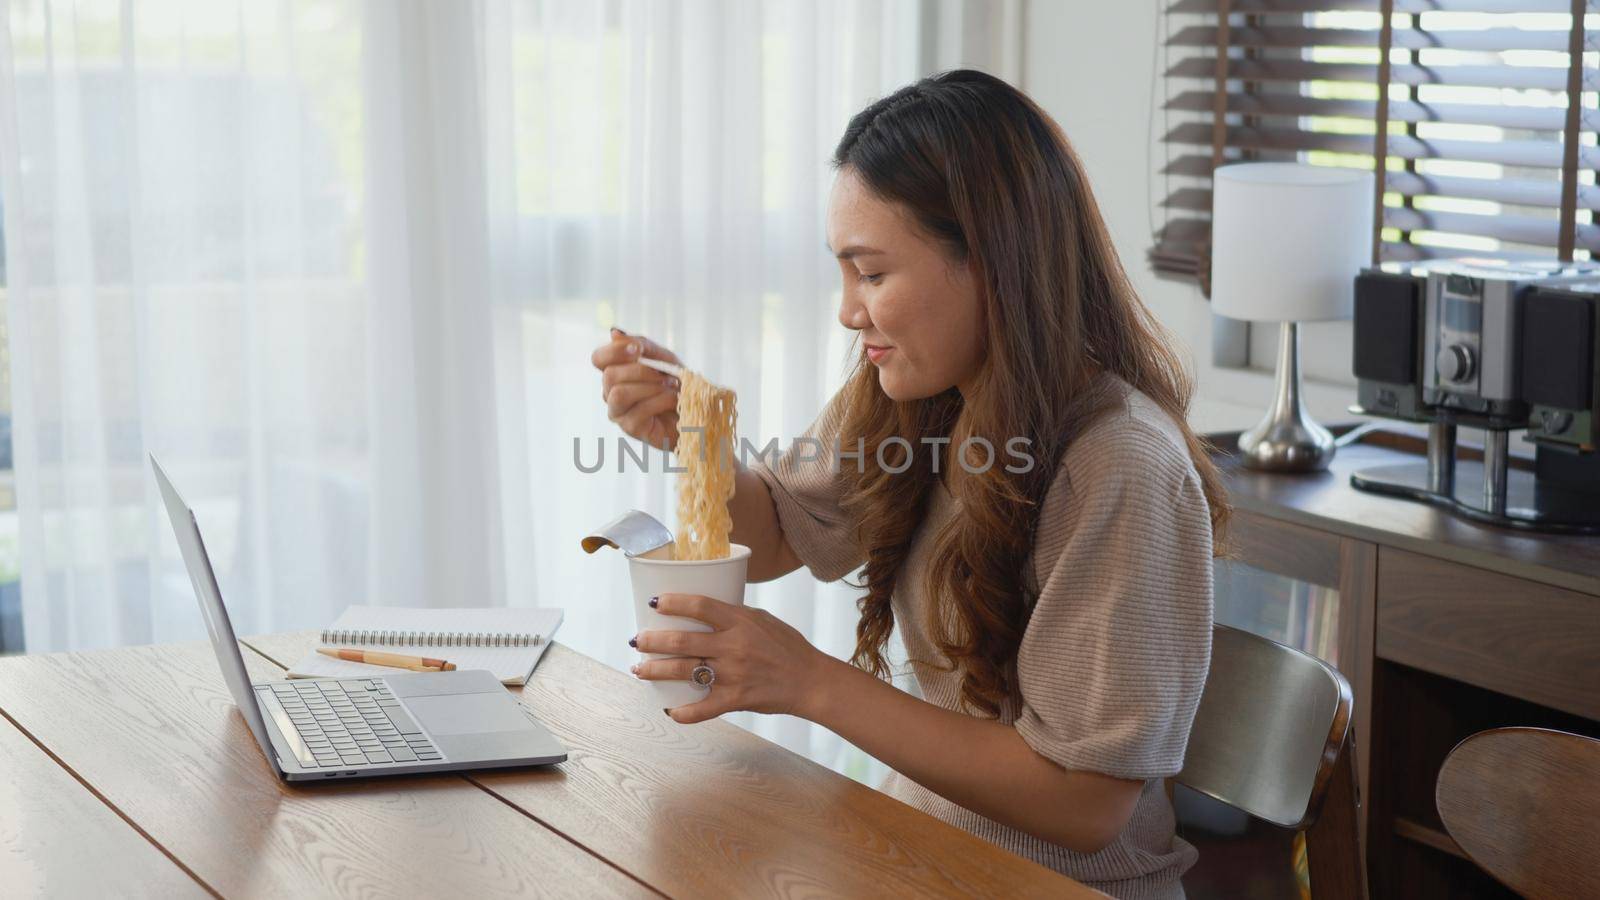 business woman eating instant noodles while working on laptop computer by Sorapop